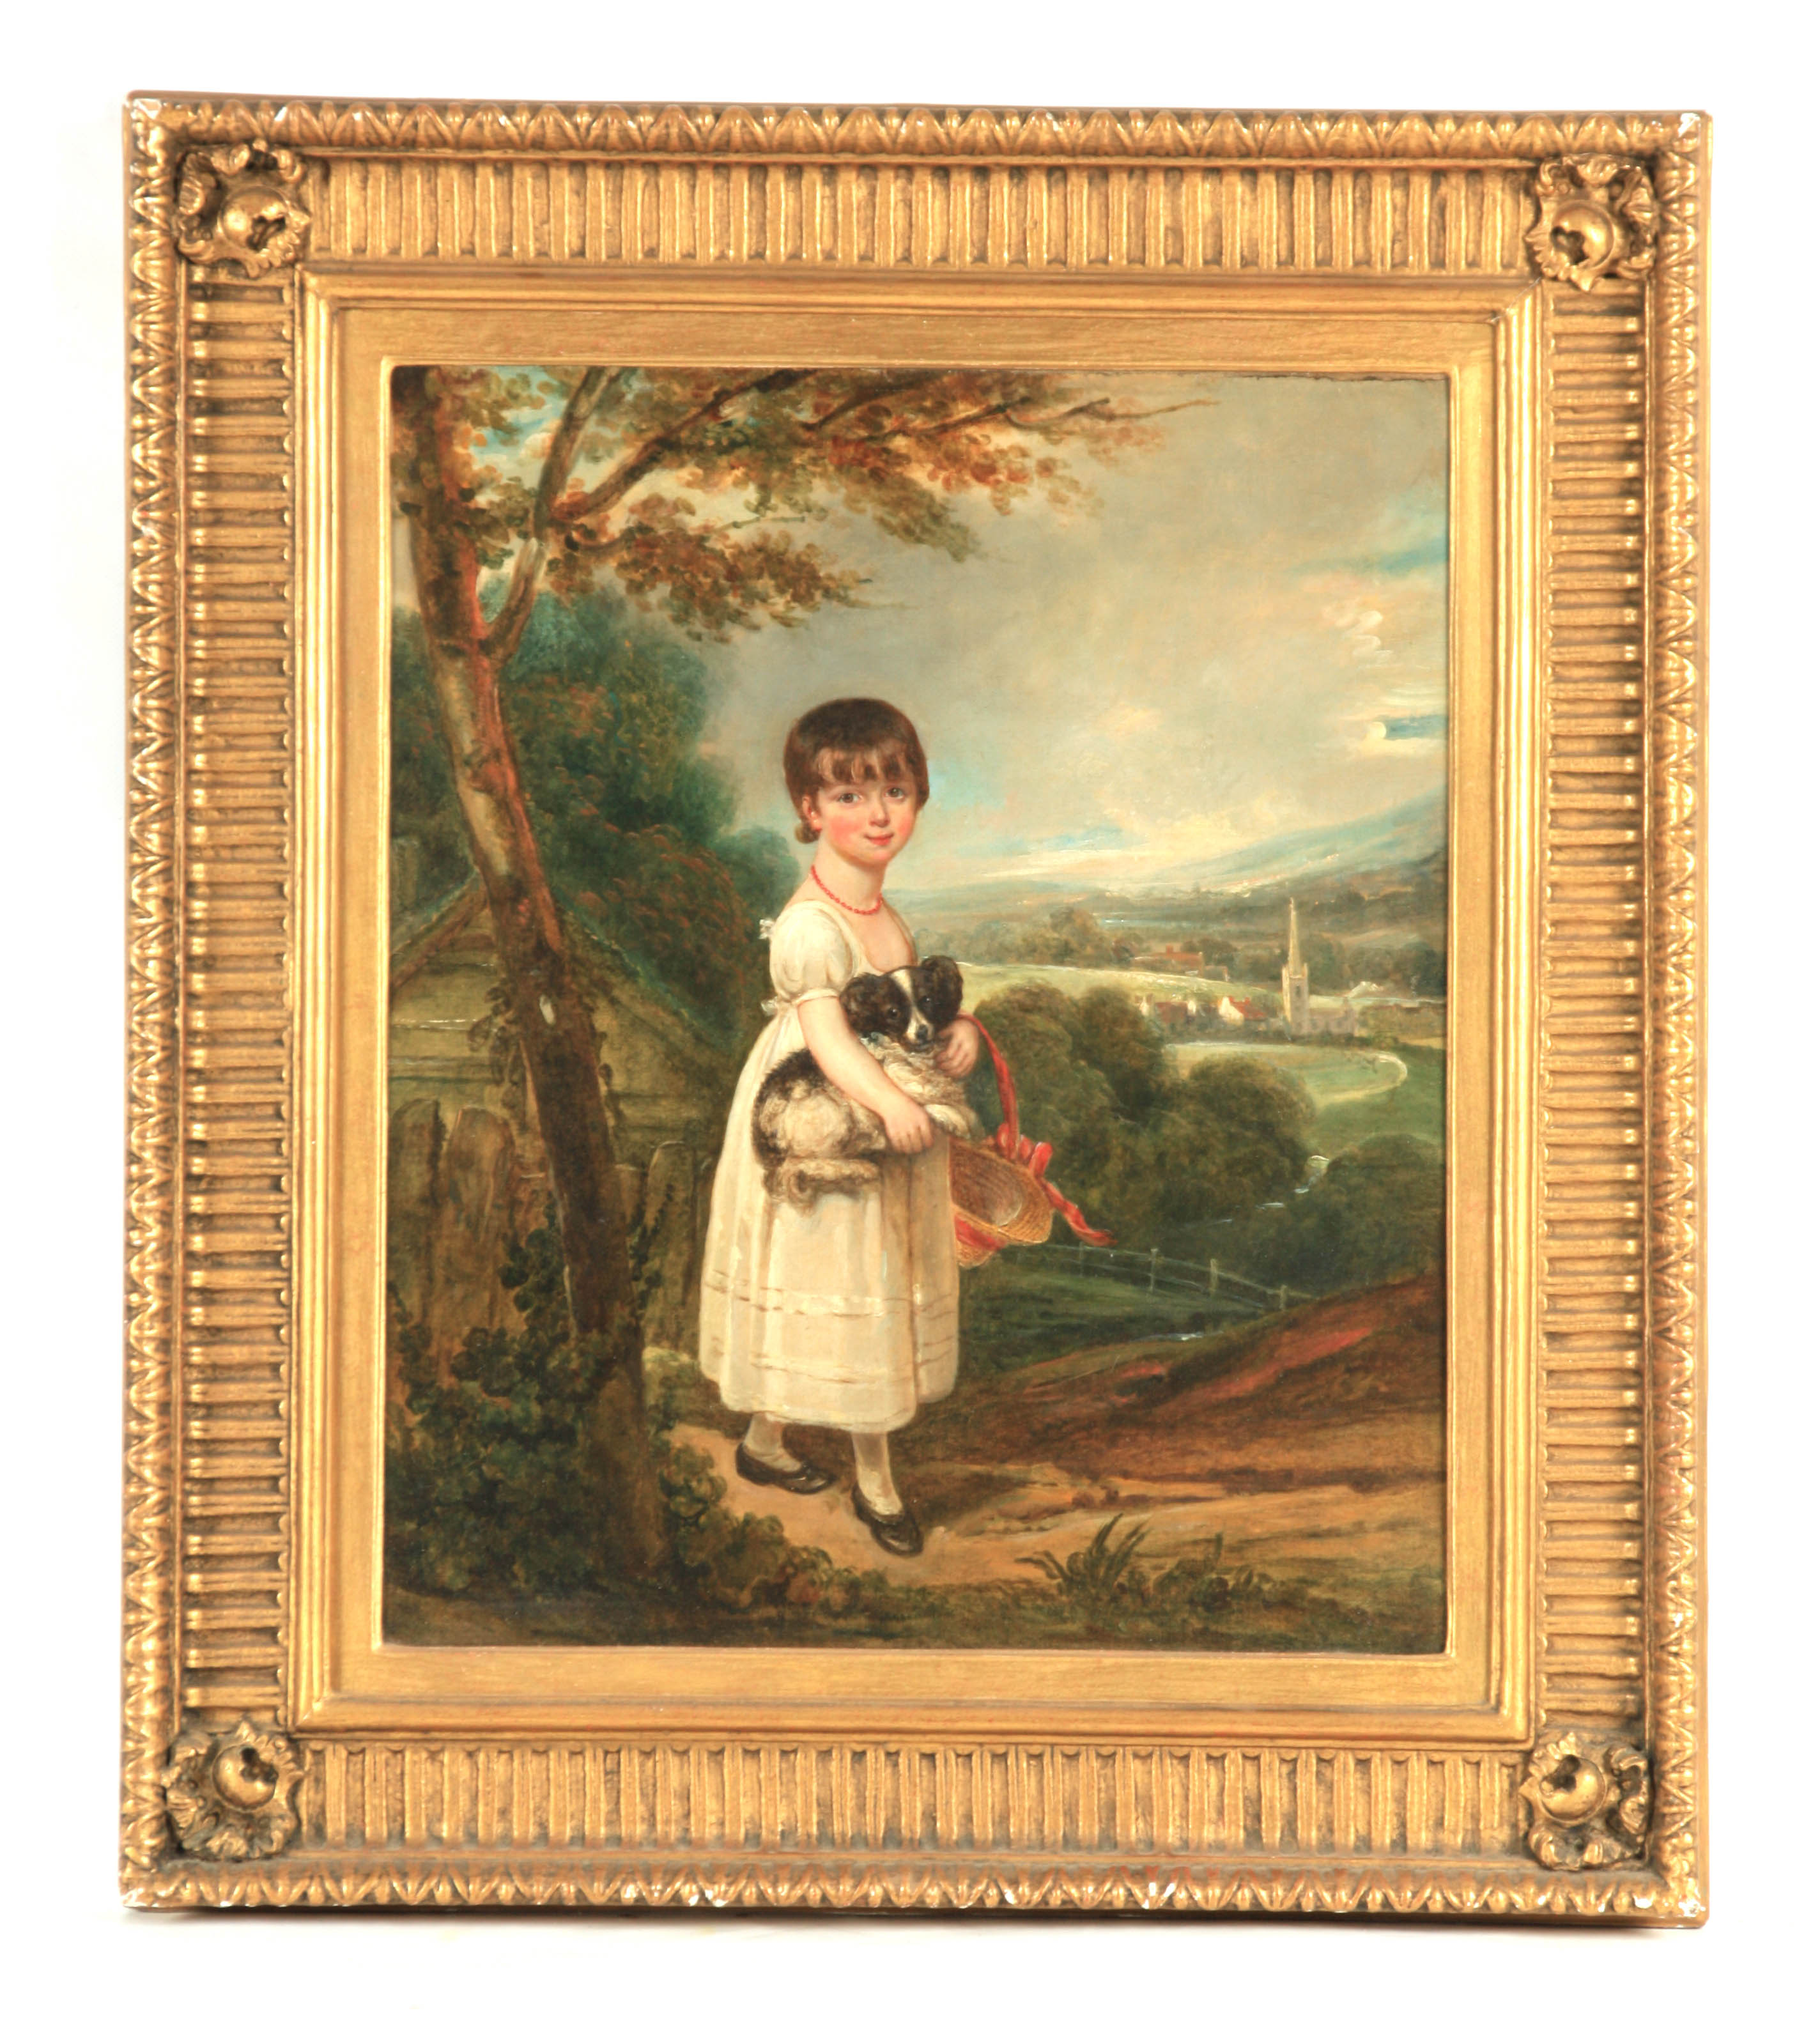 WILLIAM WESTALL 1781-1850. AN EARLY 19TH CENTURY OIL ON CANVAS Full-length portrait of a young